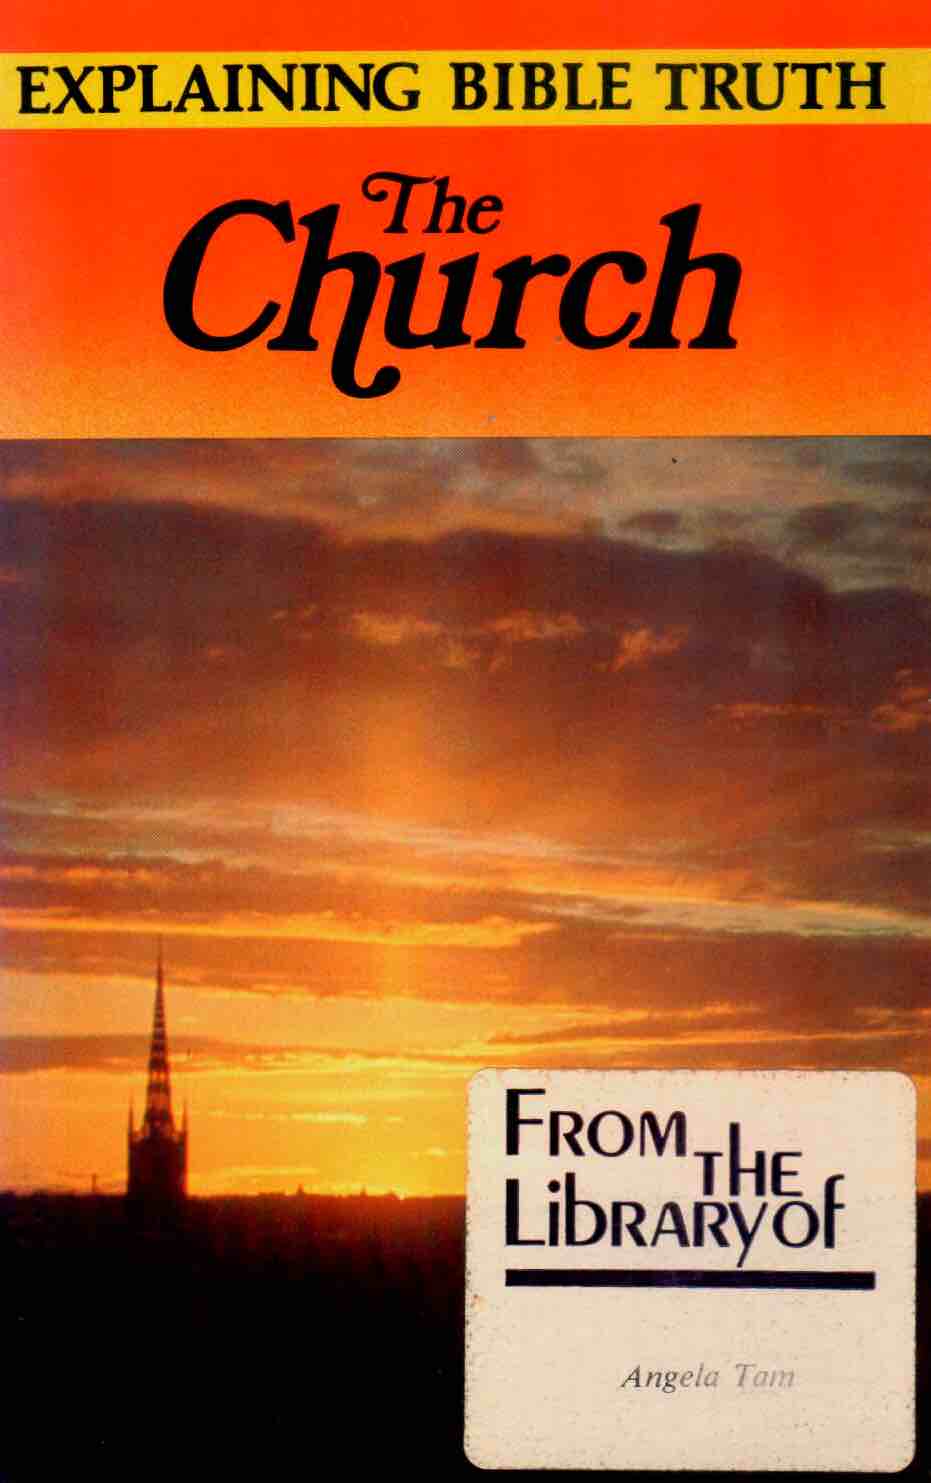 Cover of The Church